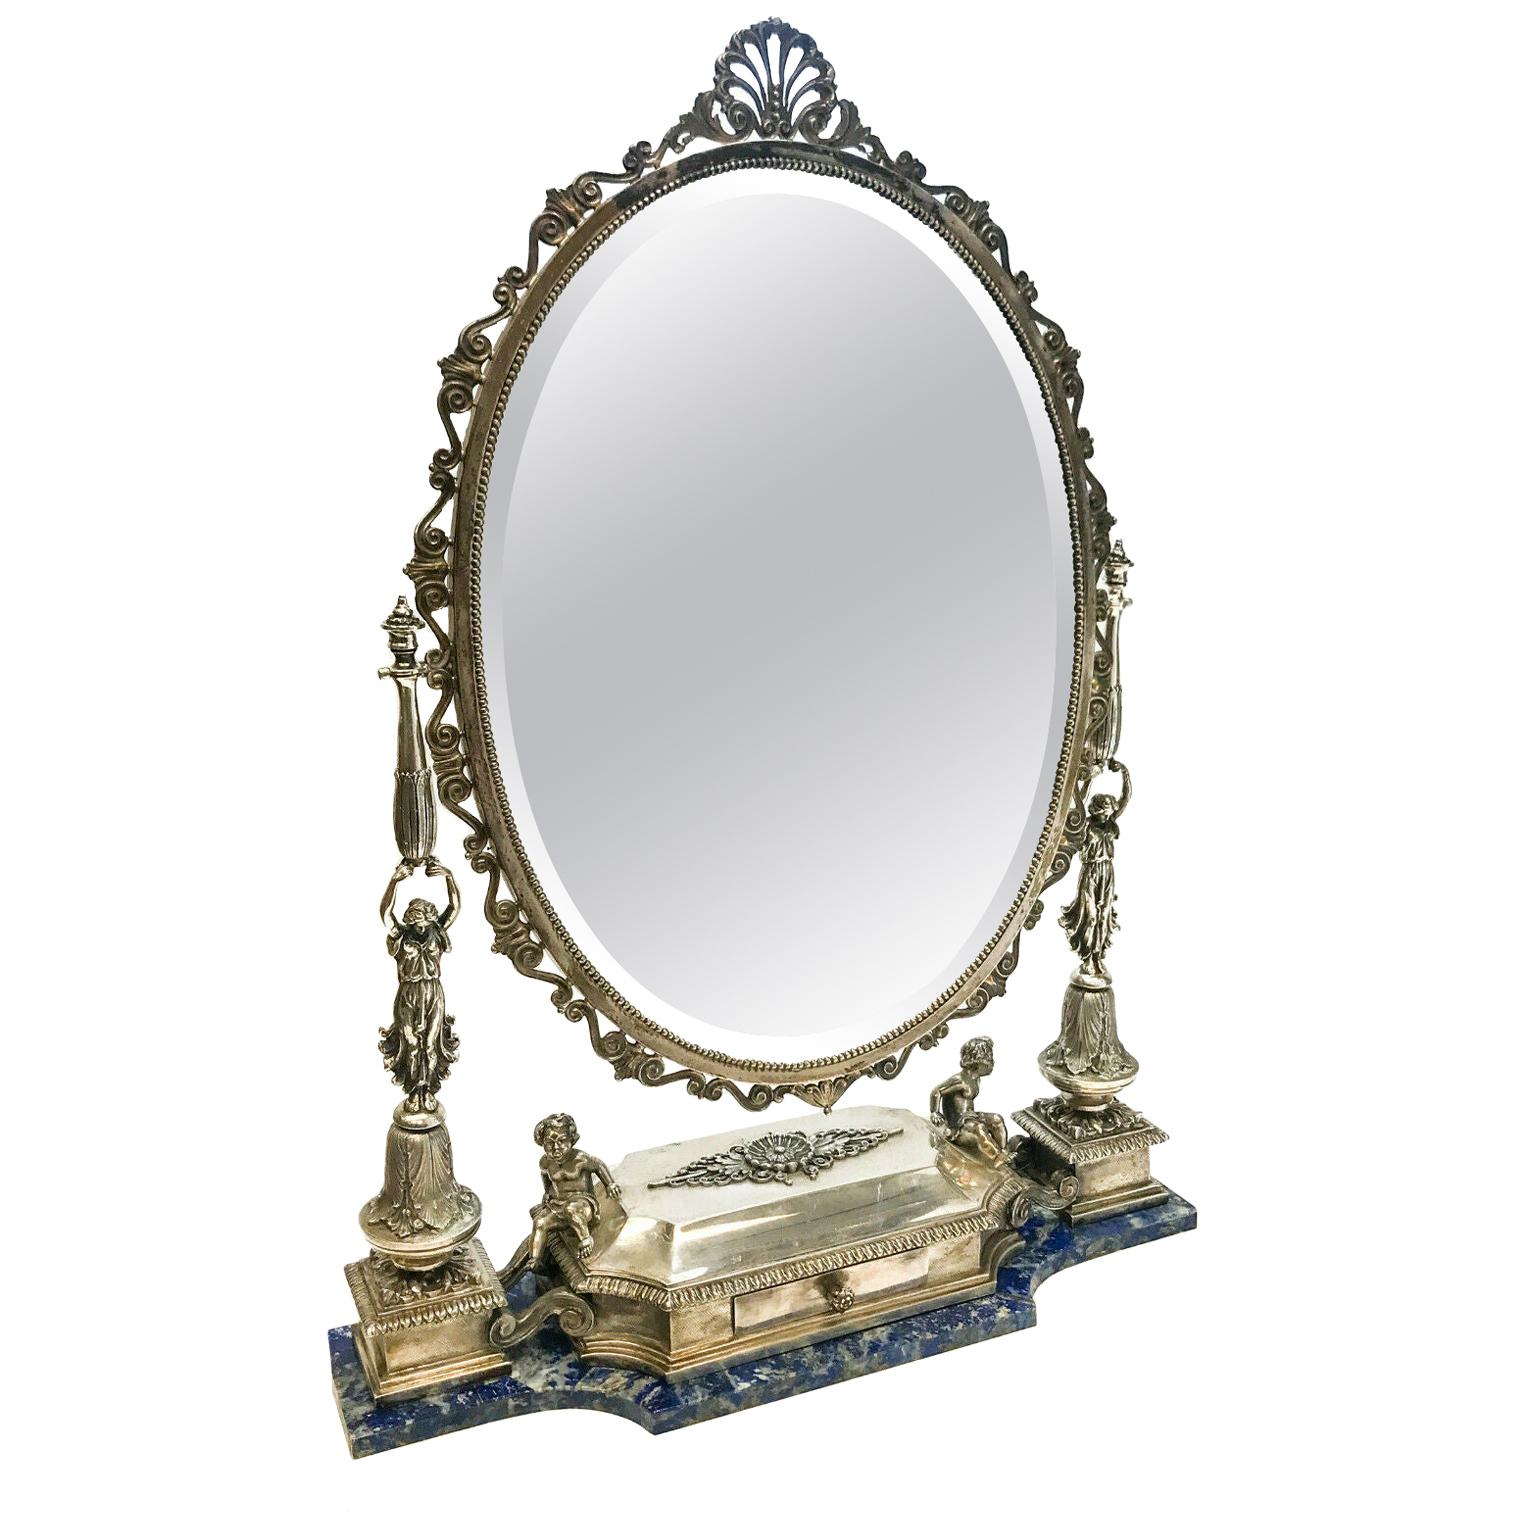 Buccellati Italian Sterling Silver and Lapis Lazuli Vanity Mirror For Sale